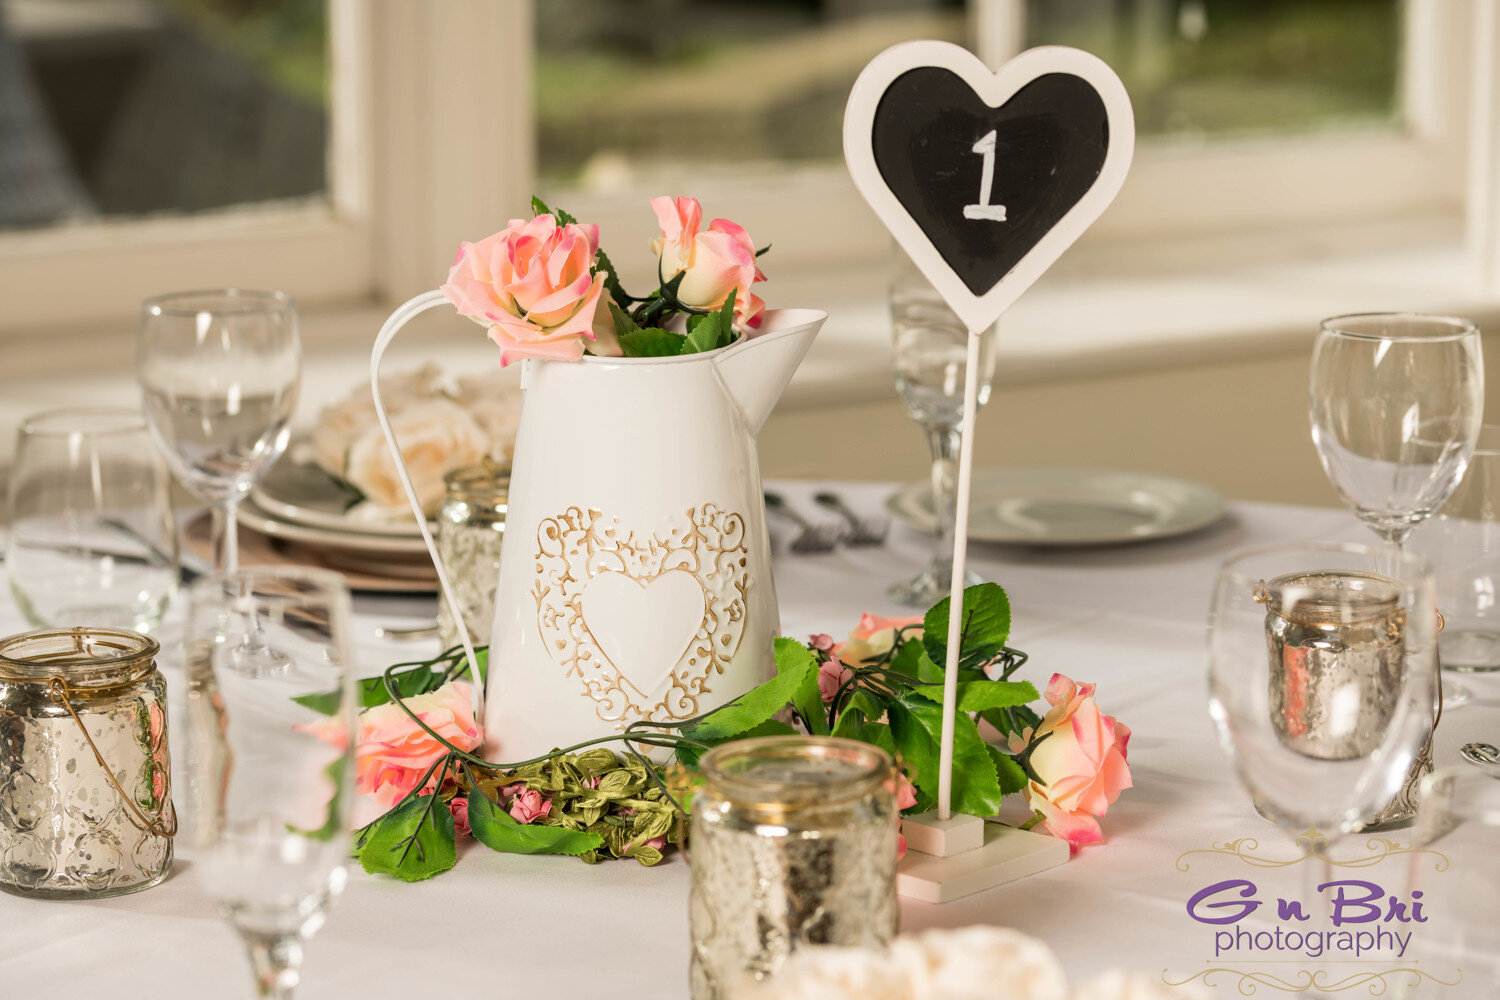 Scapescape_Wedding Inspiration_Table Centrepiece_Rustic and Roses_GnBri Photography